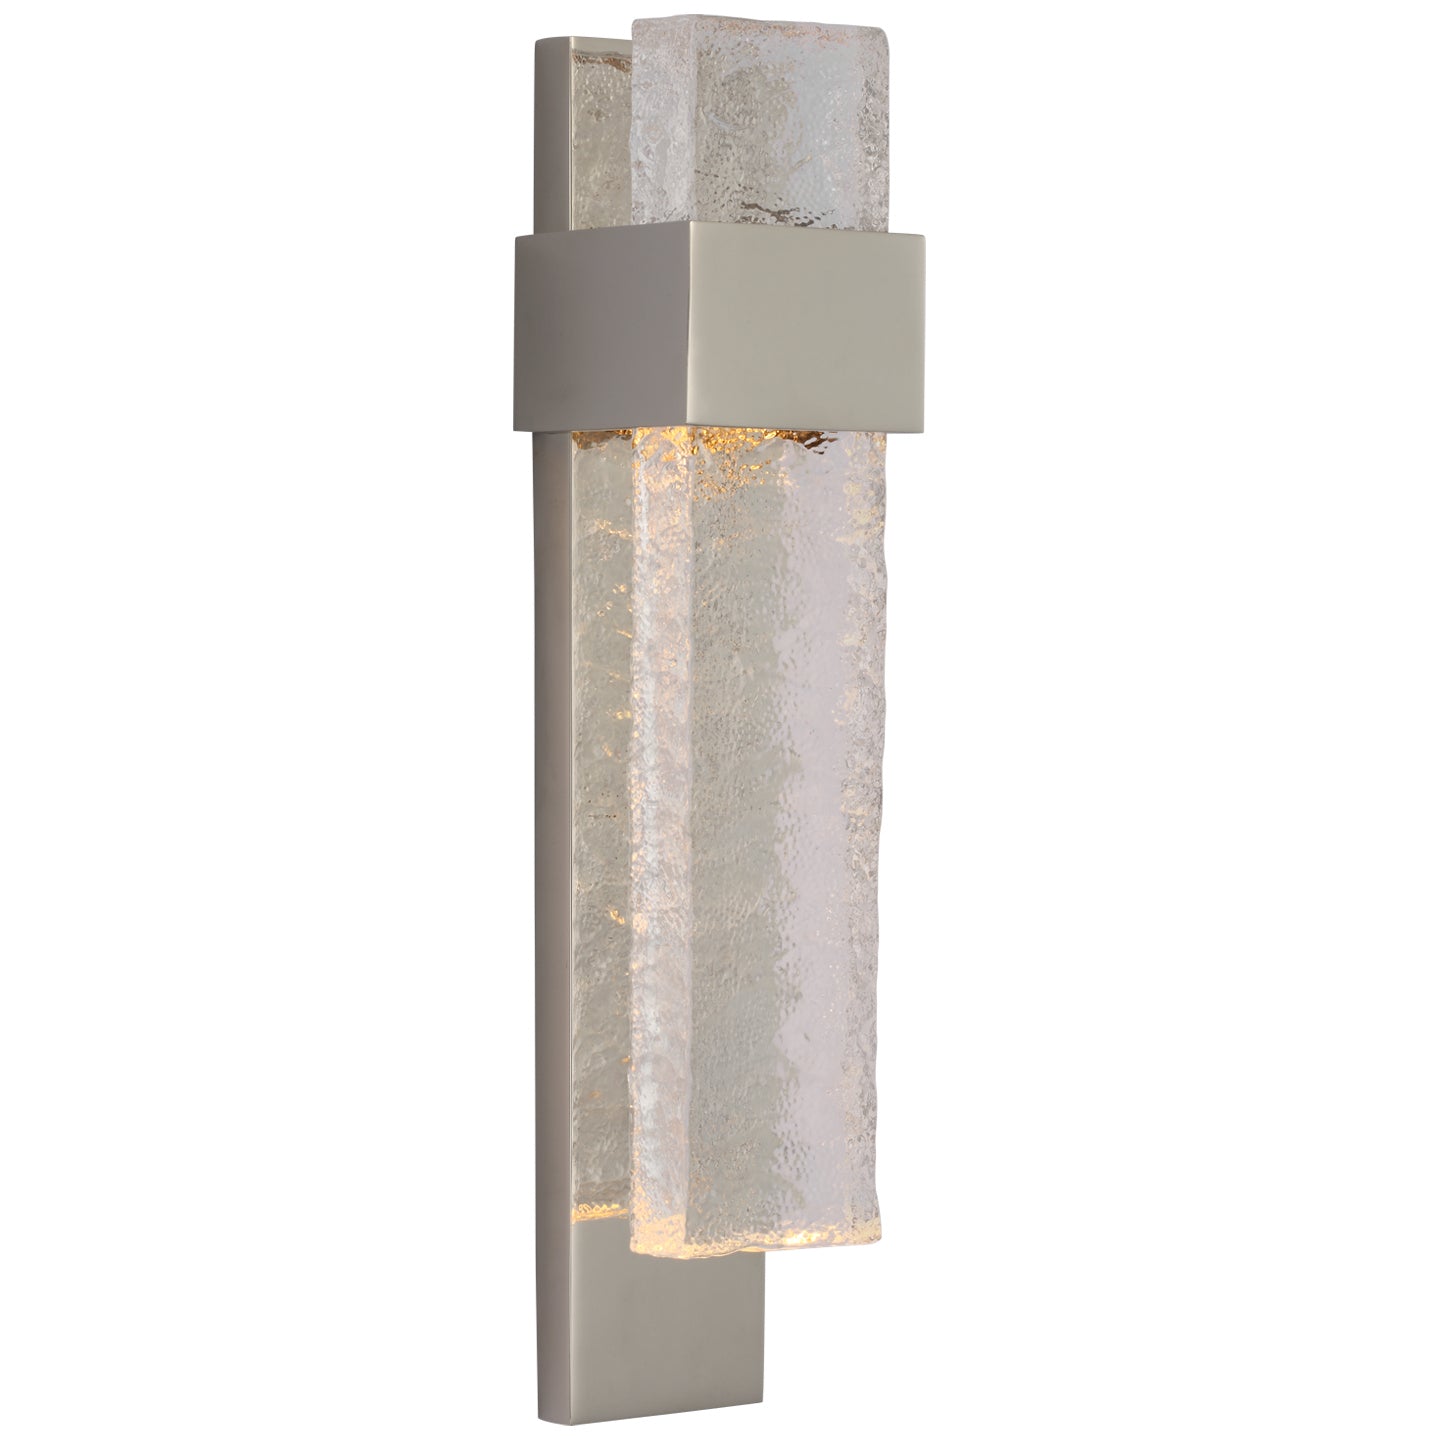 Visual Comfort Signature - S 2340PN/CWG - LED Wall Sconce - Brock - Polished Nickel and Clear Wavy Glass